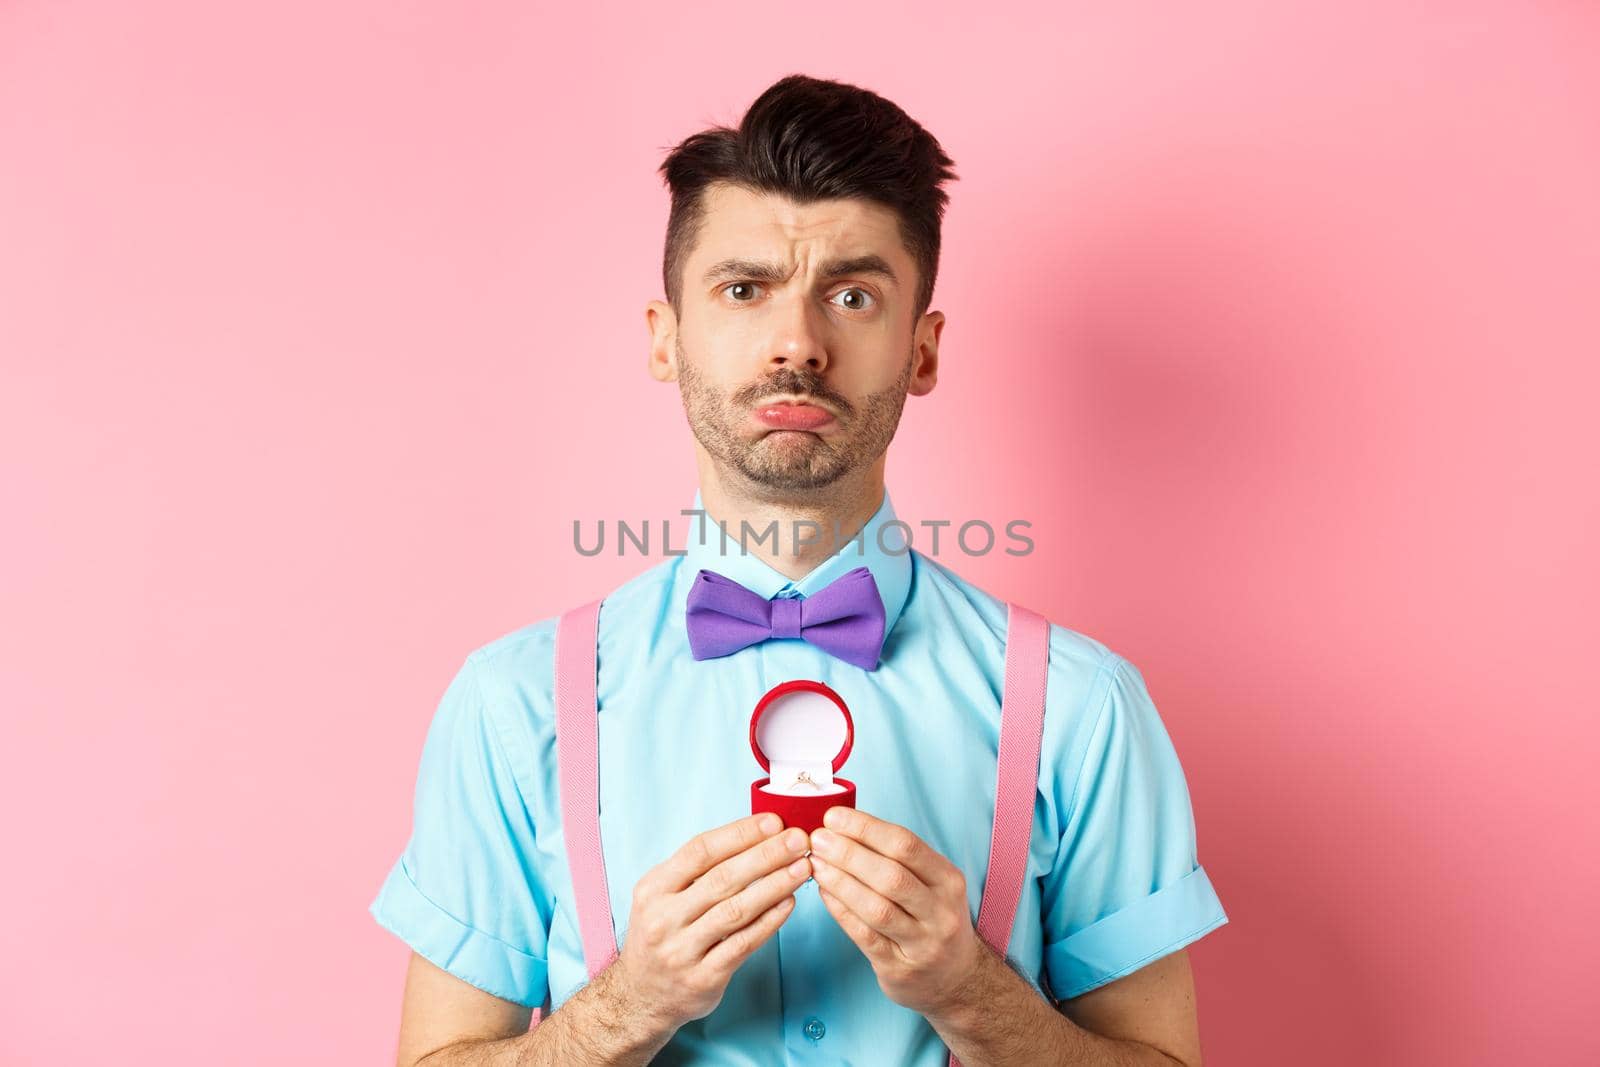 Valentines day. Sad boyfriend being rejected, showing engagement ring and sulking upset, she said no, standing over pink background.